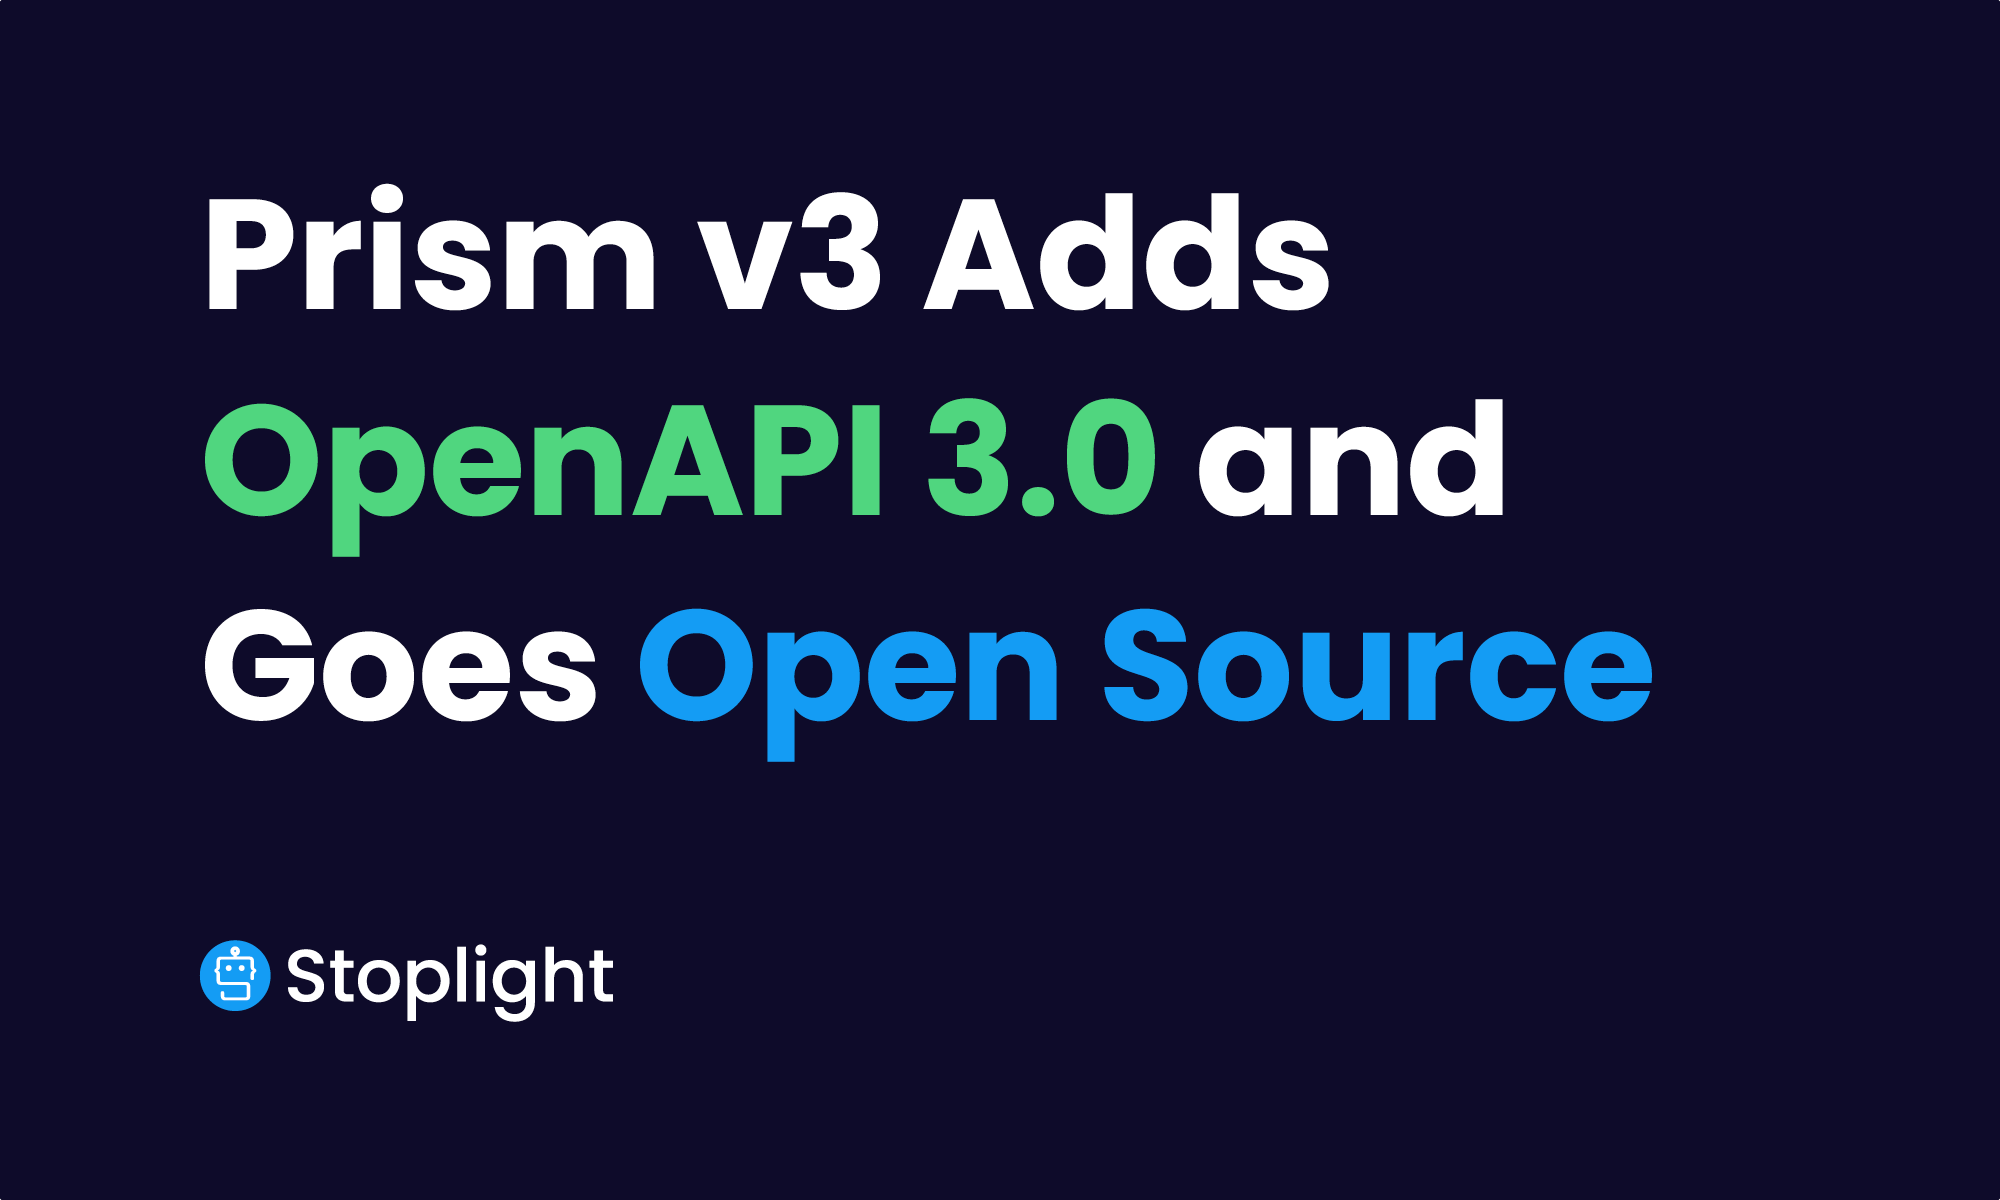 Prism v3 Adds OpenAPI 3.0 and Goes Open Source